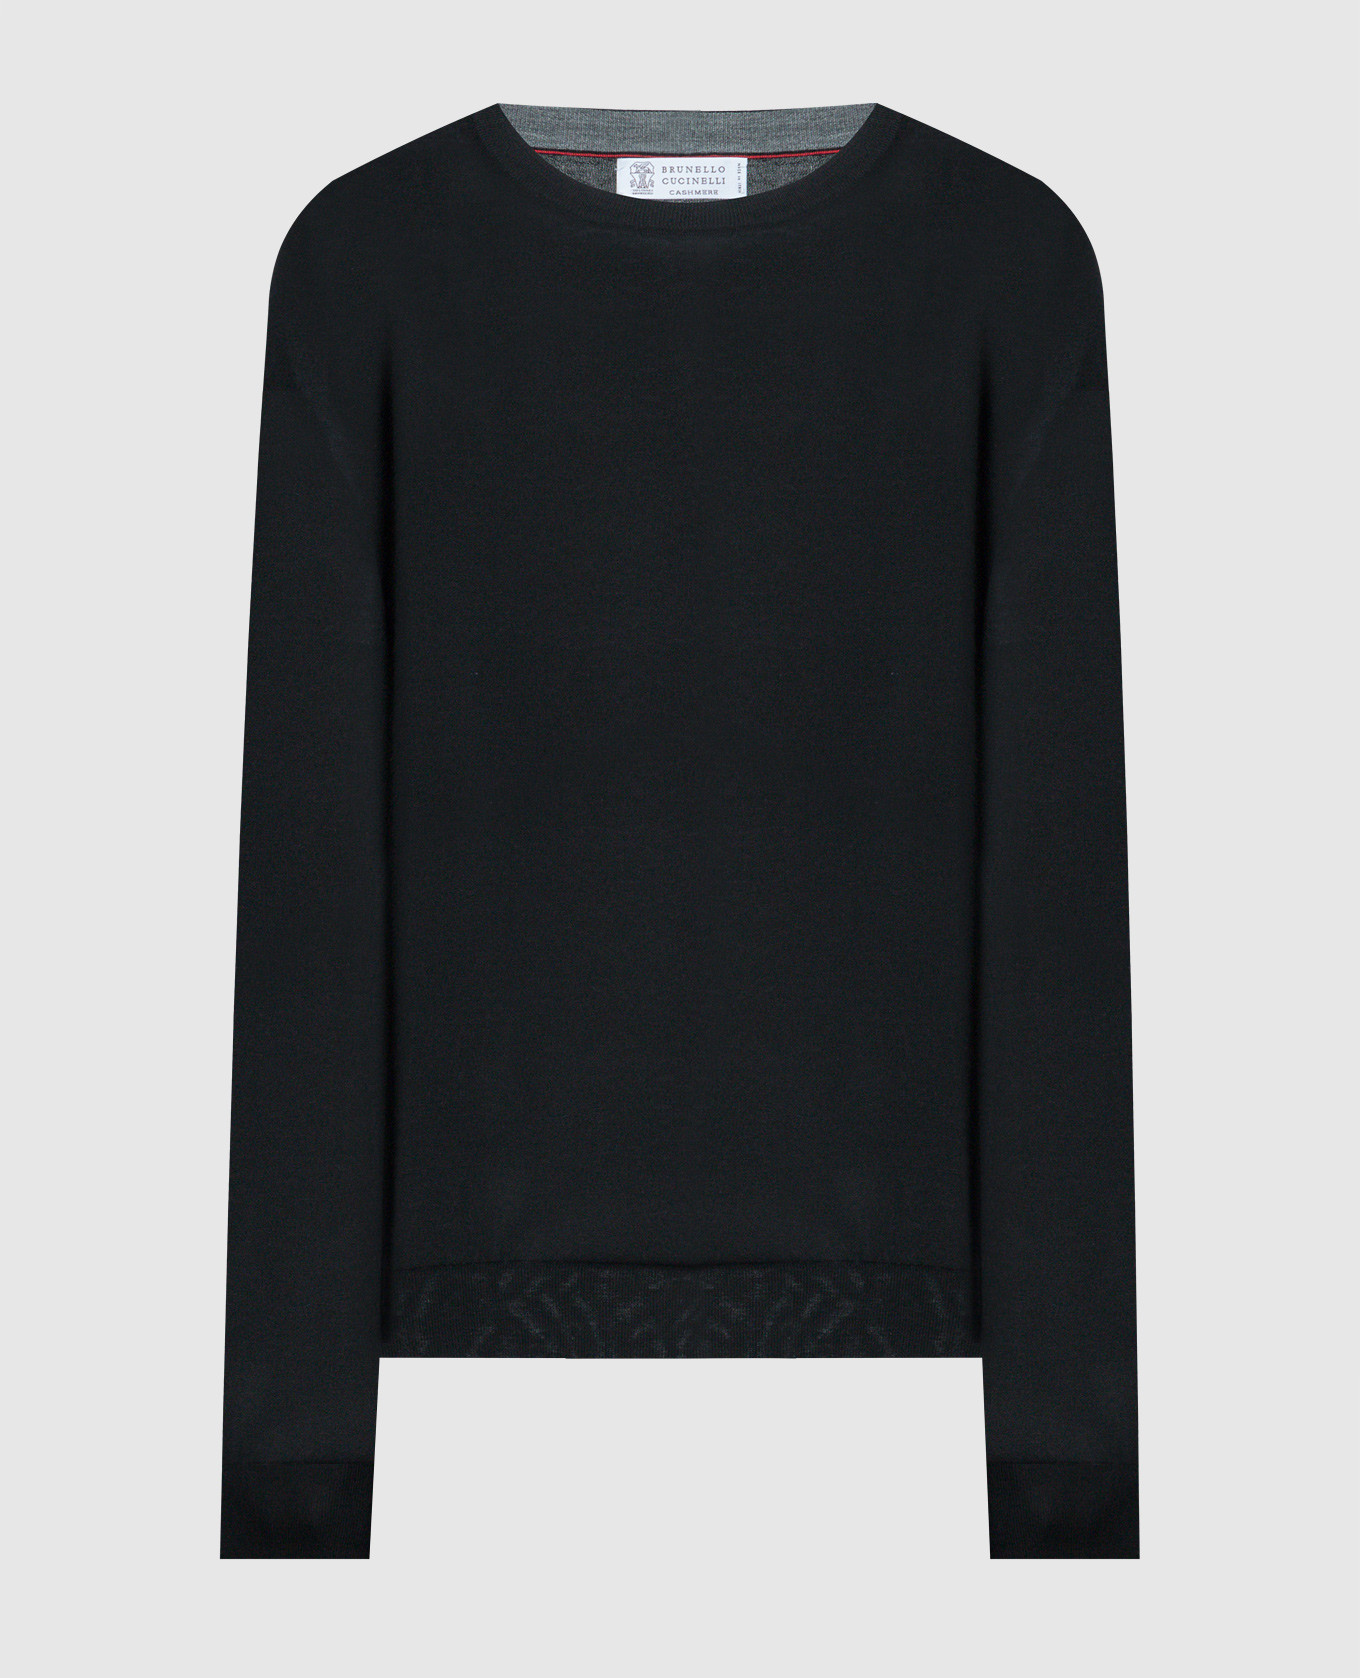 Black wool and cashmere jumper